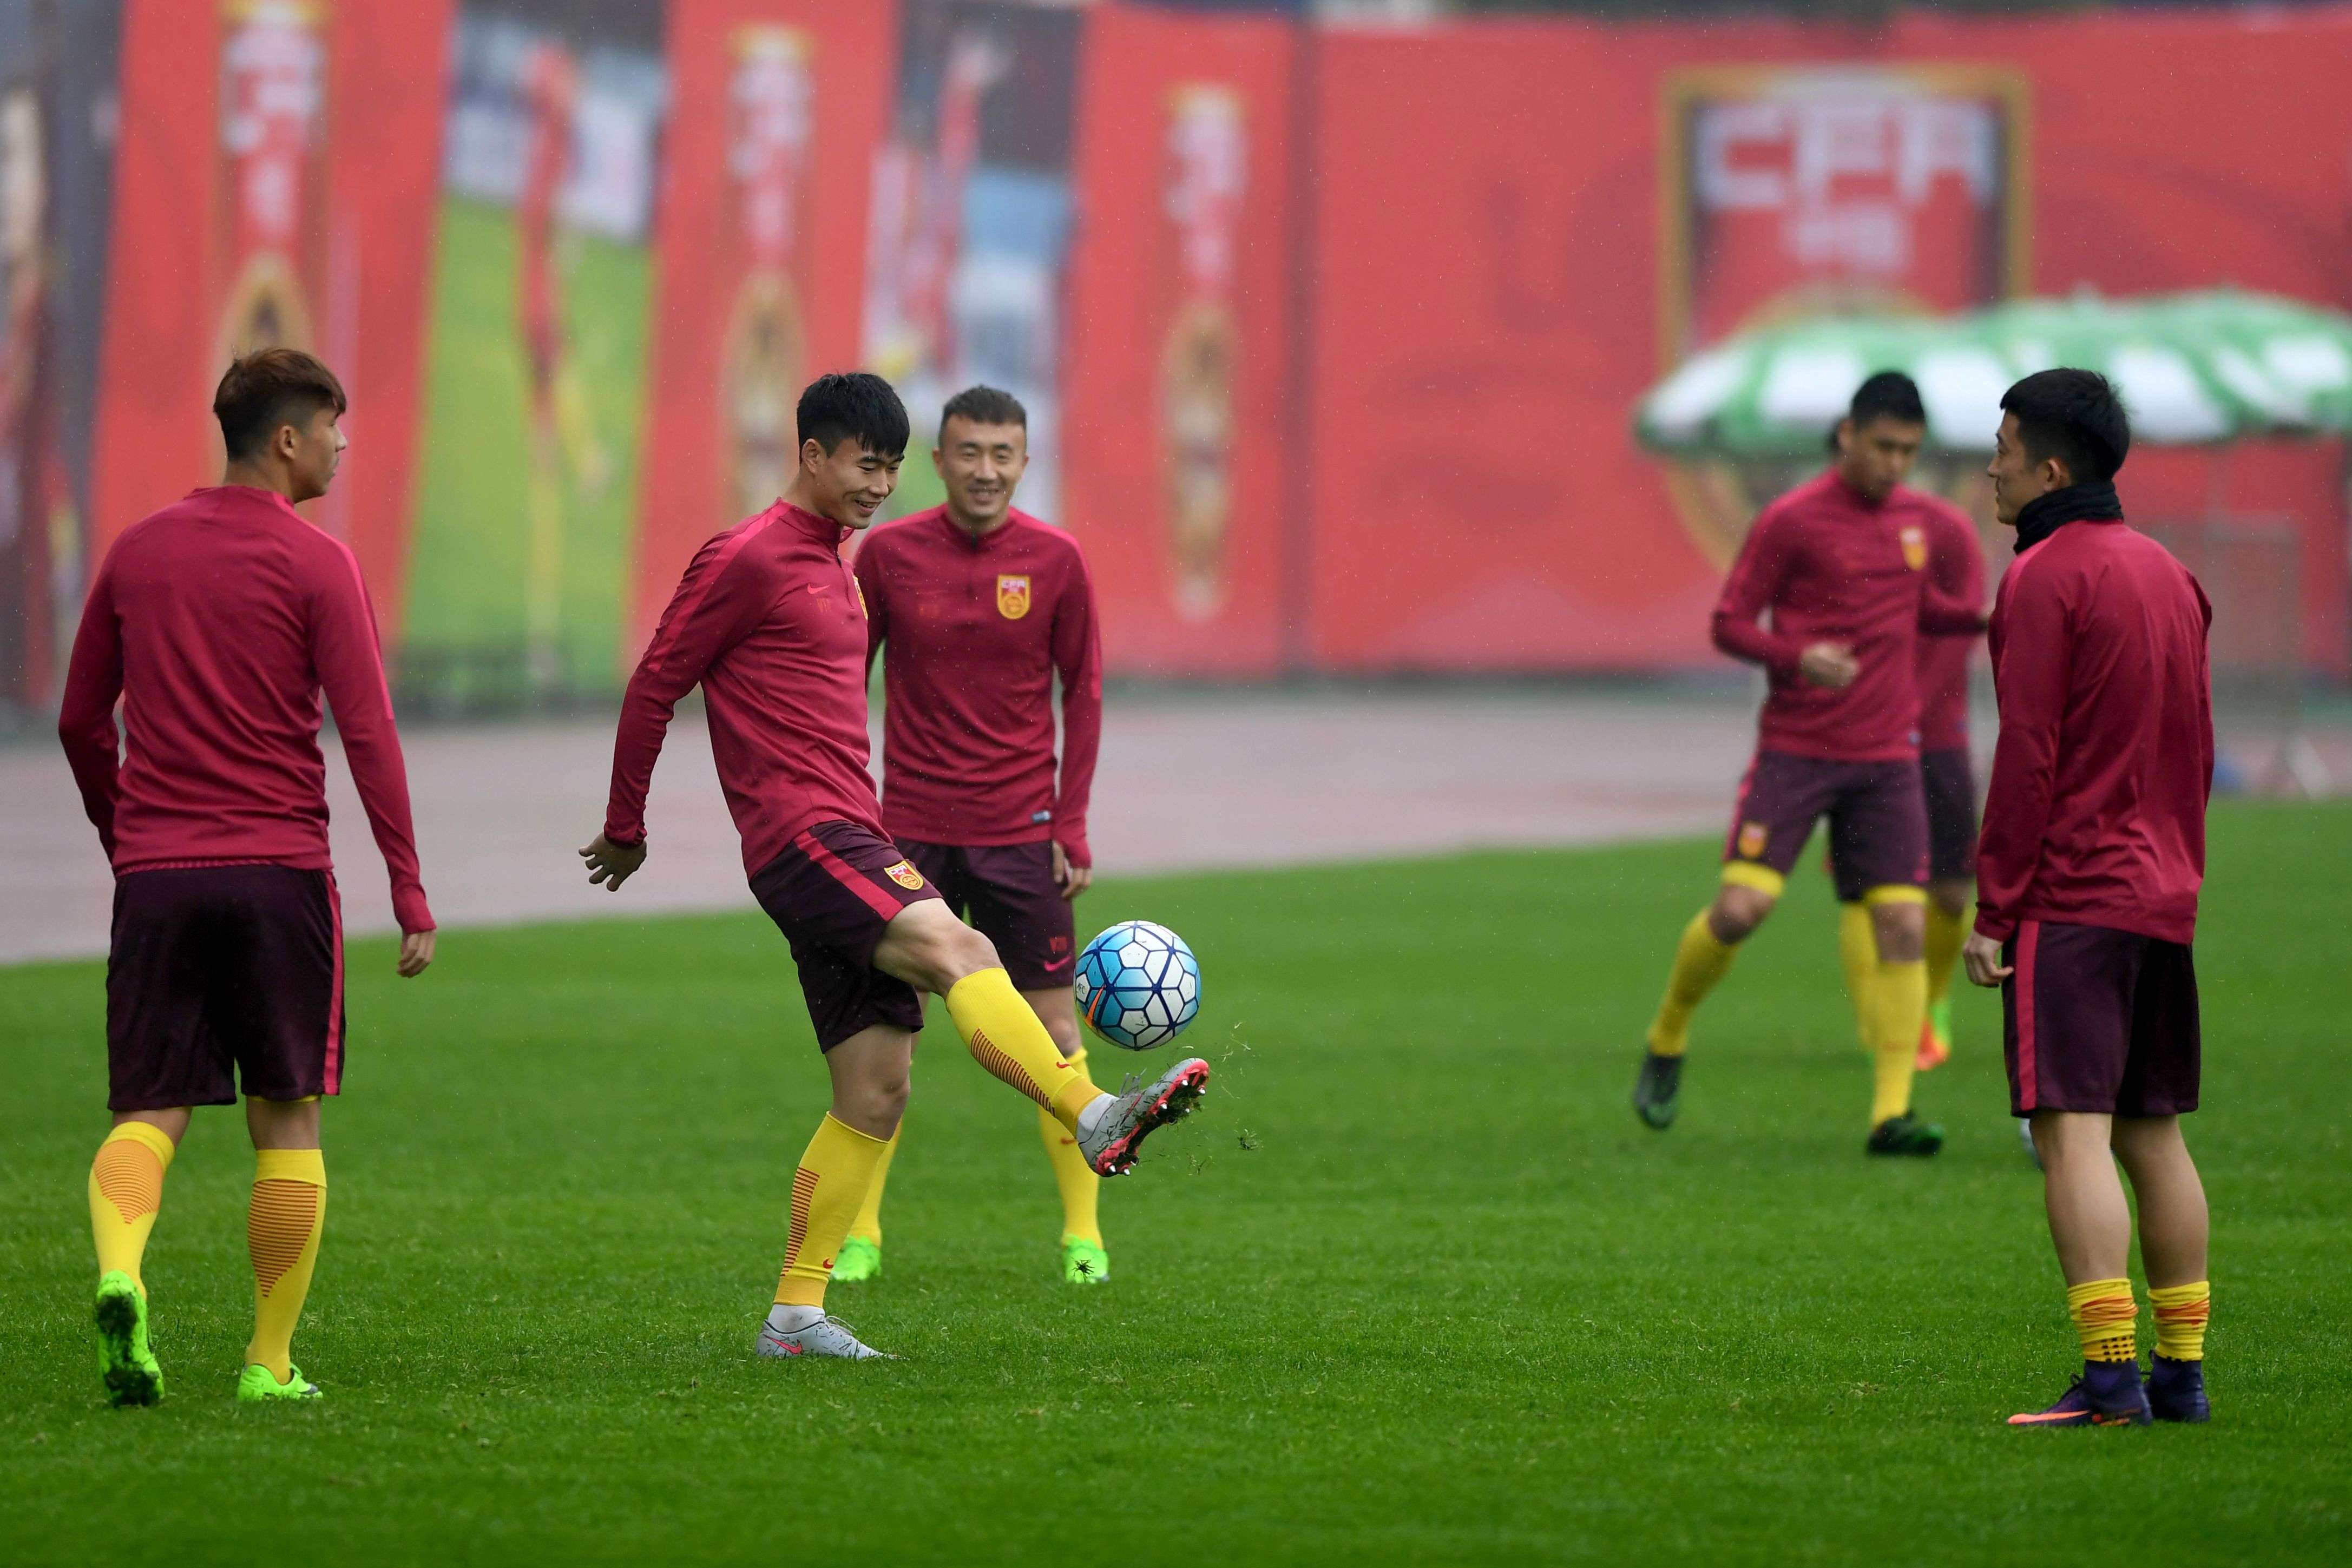 Members of China's national team take part in a training session for the upcoming World Cup qualifier football match against South Korea in Changsha. Photo: AFP